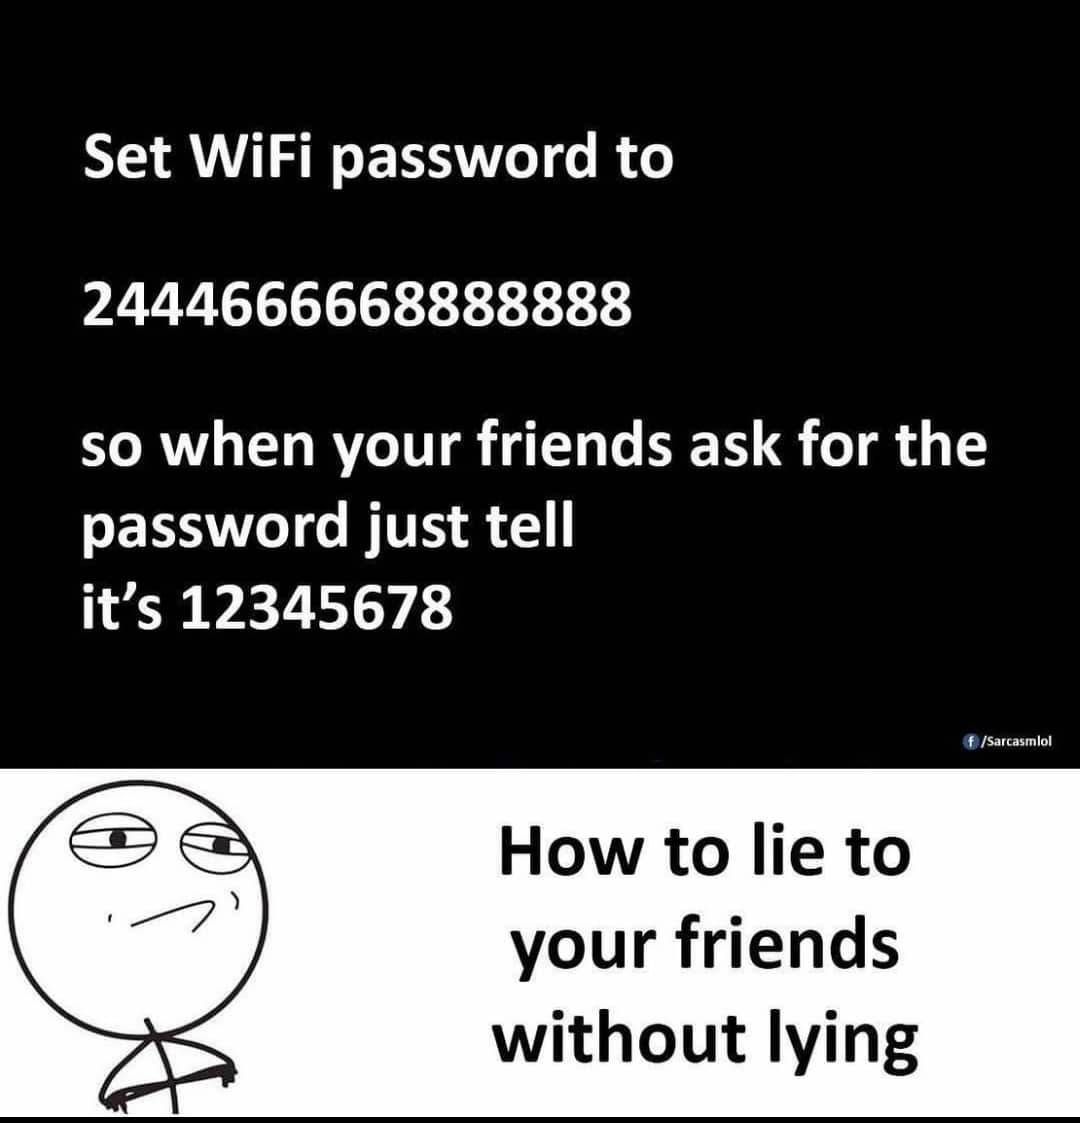 Cringe,  cringe memes Cringe,  text: Set WiFi password to 2444666668888888 so when your friends ask for the password just tell it's 12345678 